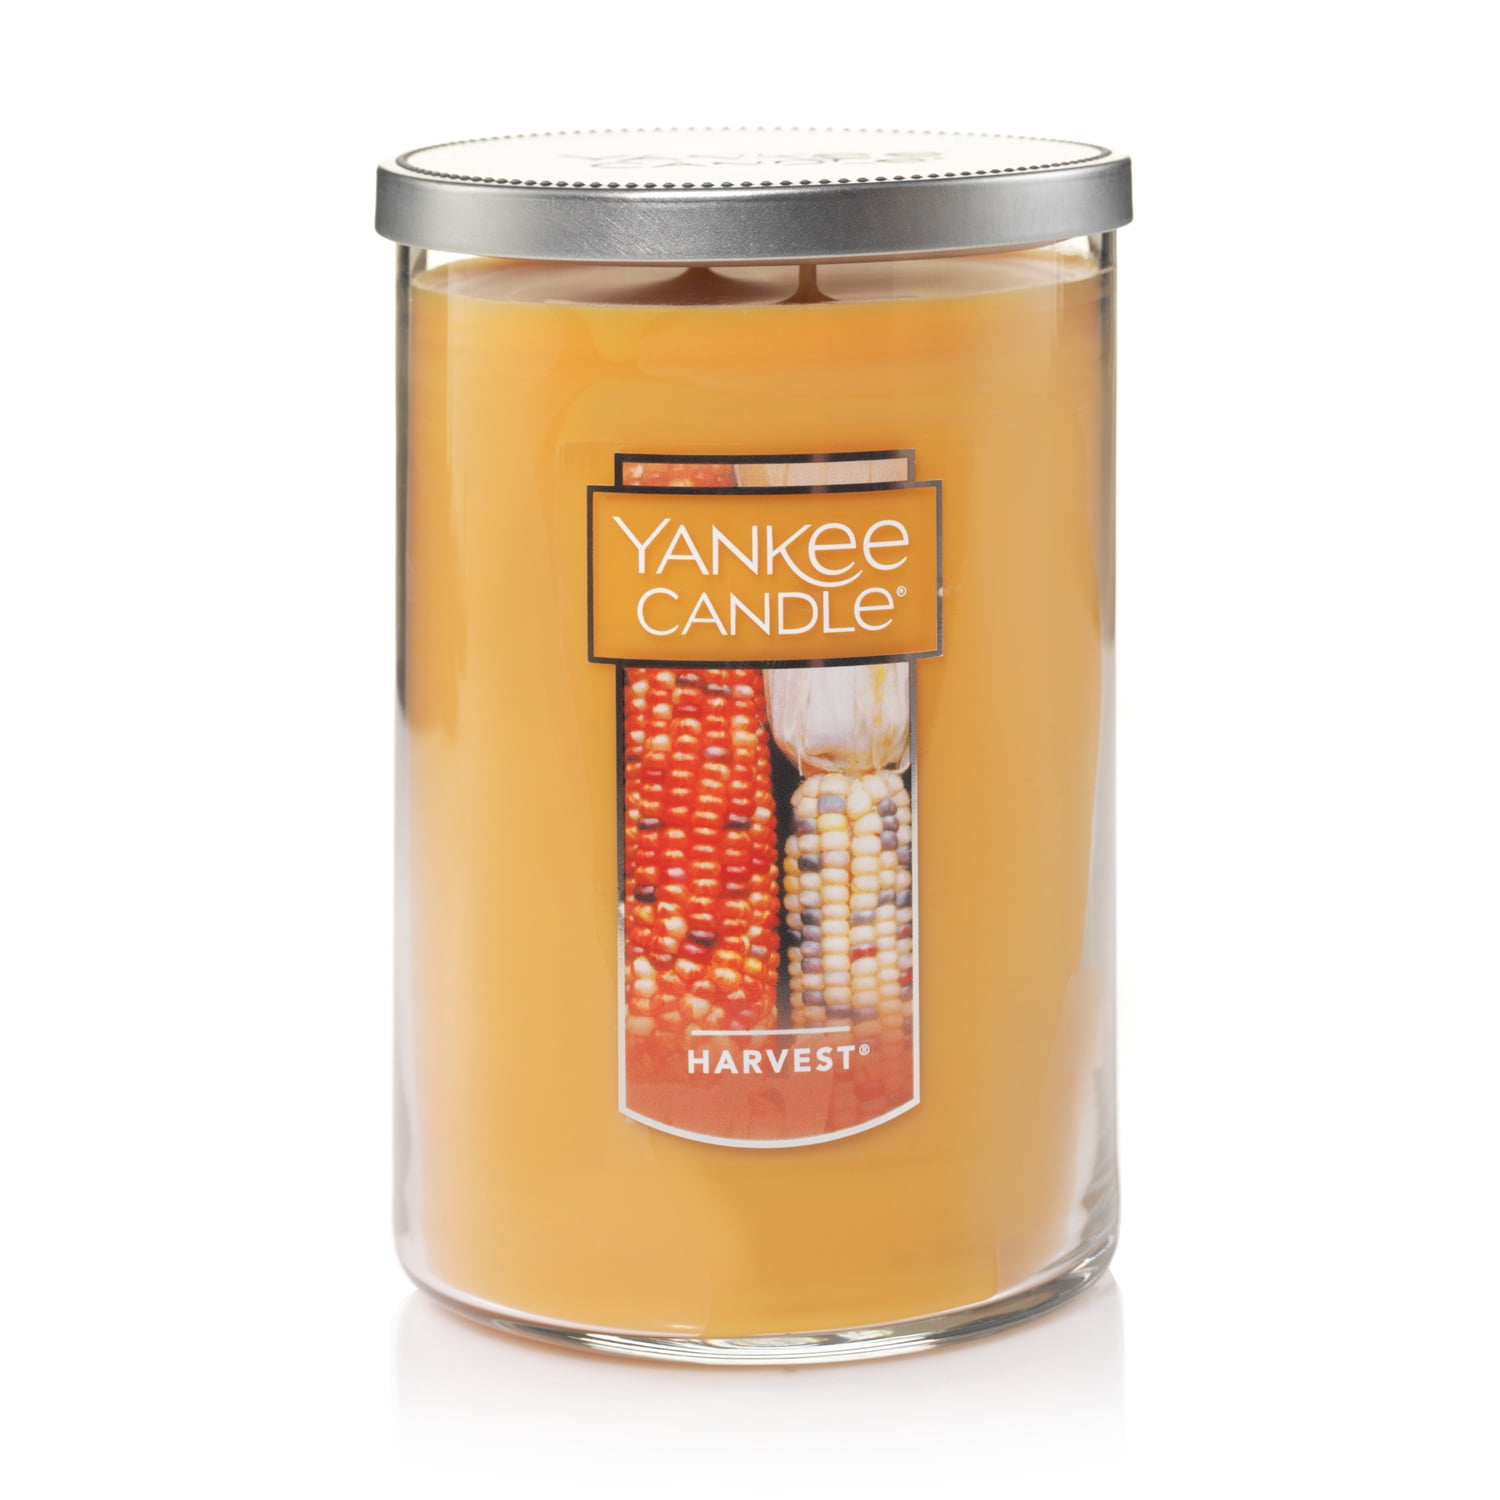 YANKEE CANDLE HARVEST 22 oz LARGE 2-WICK TUMBLER FALL FAVORITE HTF SCENT 